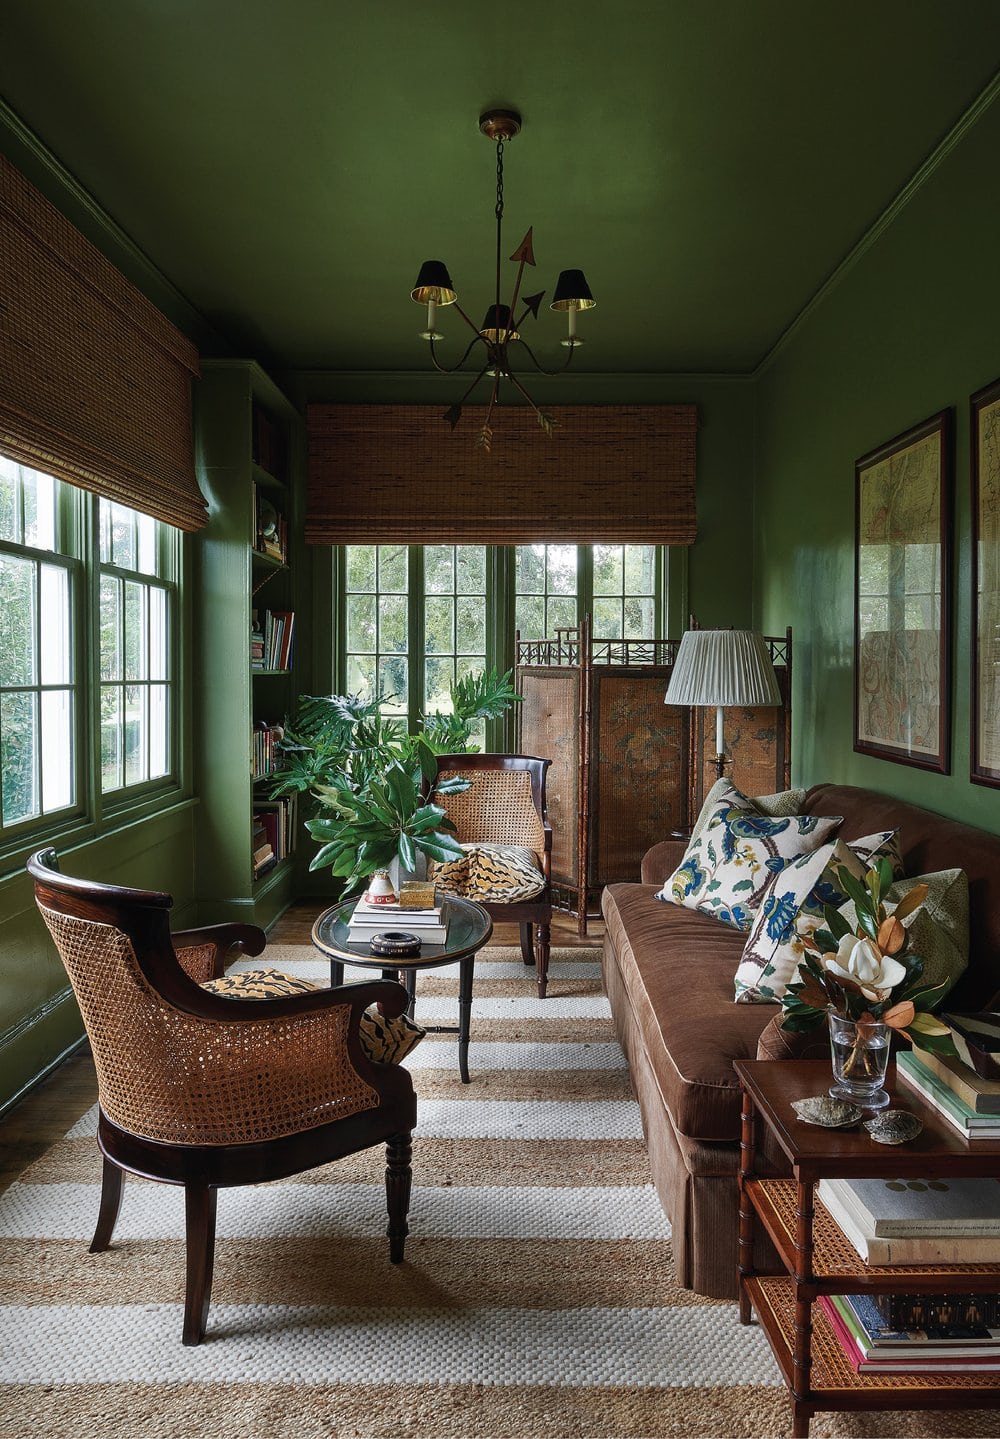 Green livingroom featured with tropical accents in interiors designed by Heather Chadduck